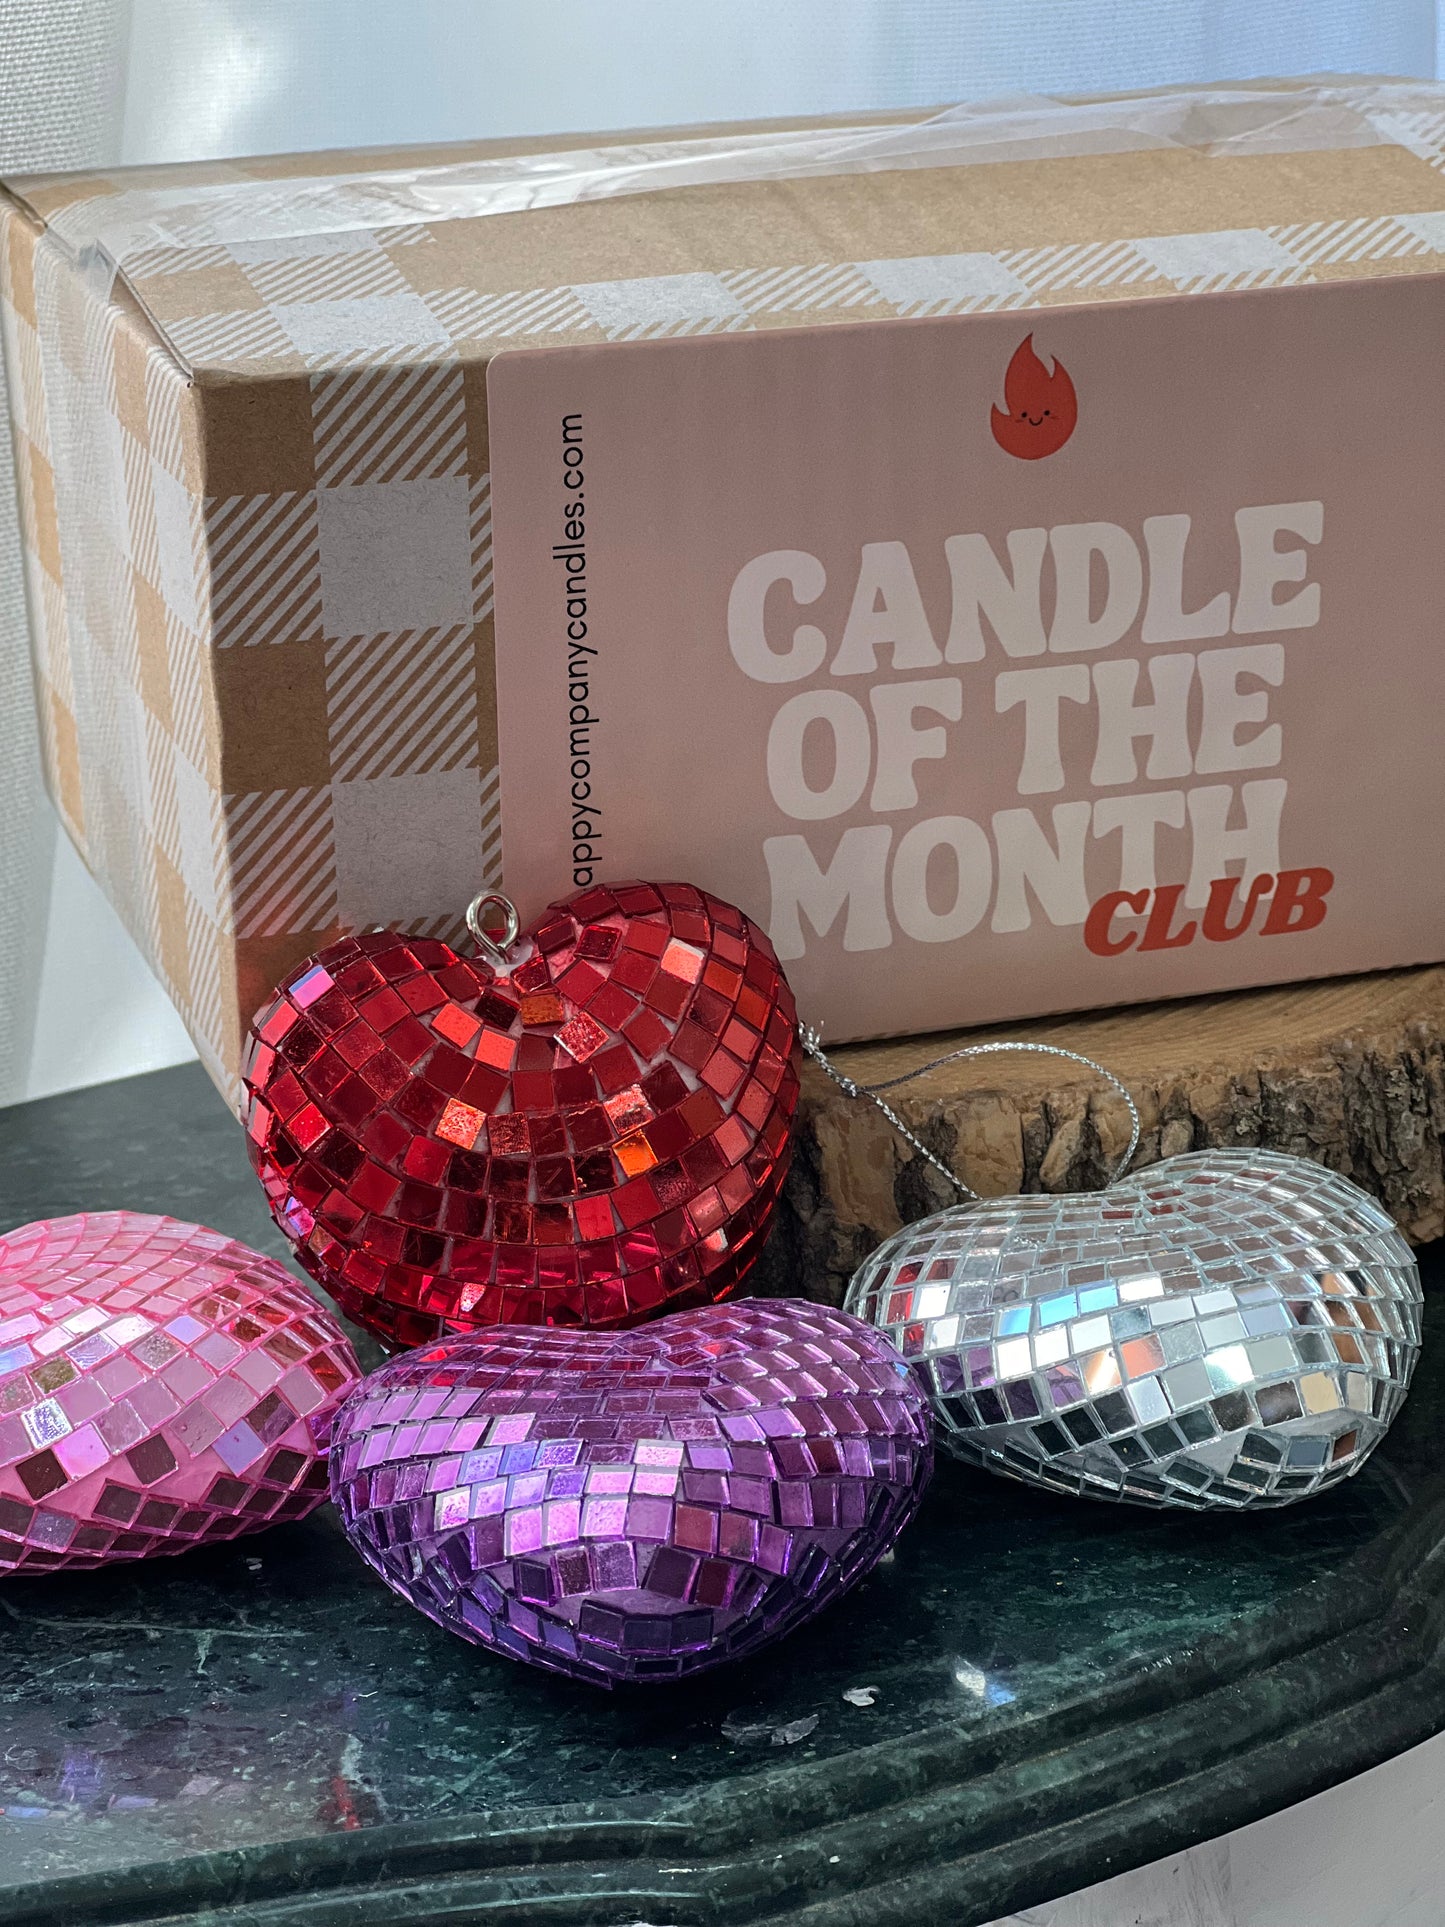 Candle Of The Month Club!